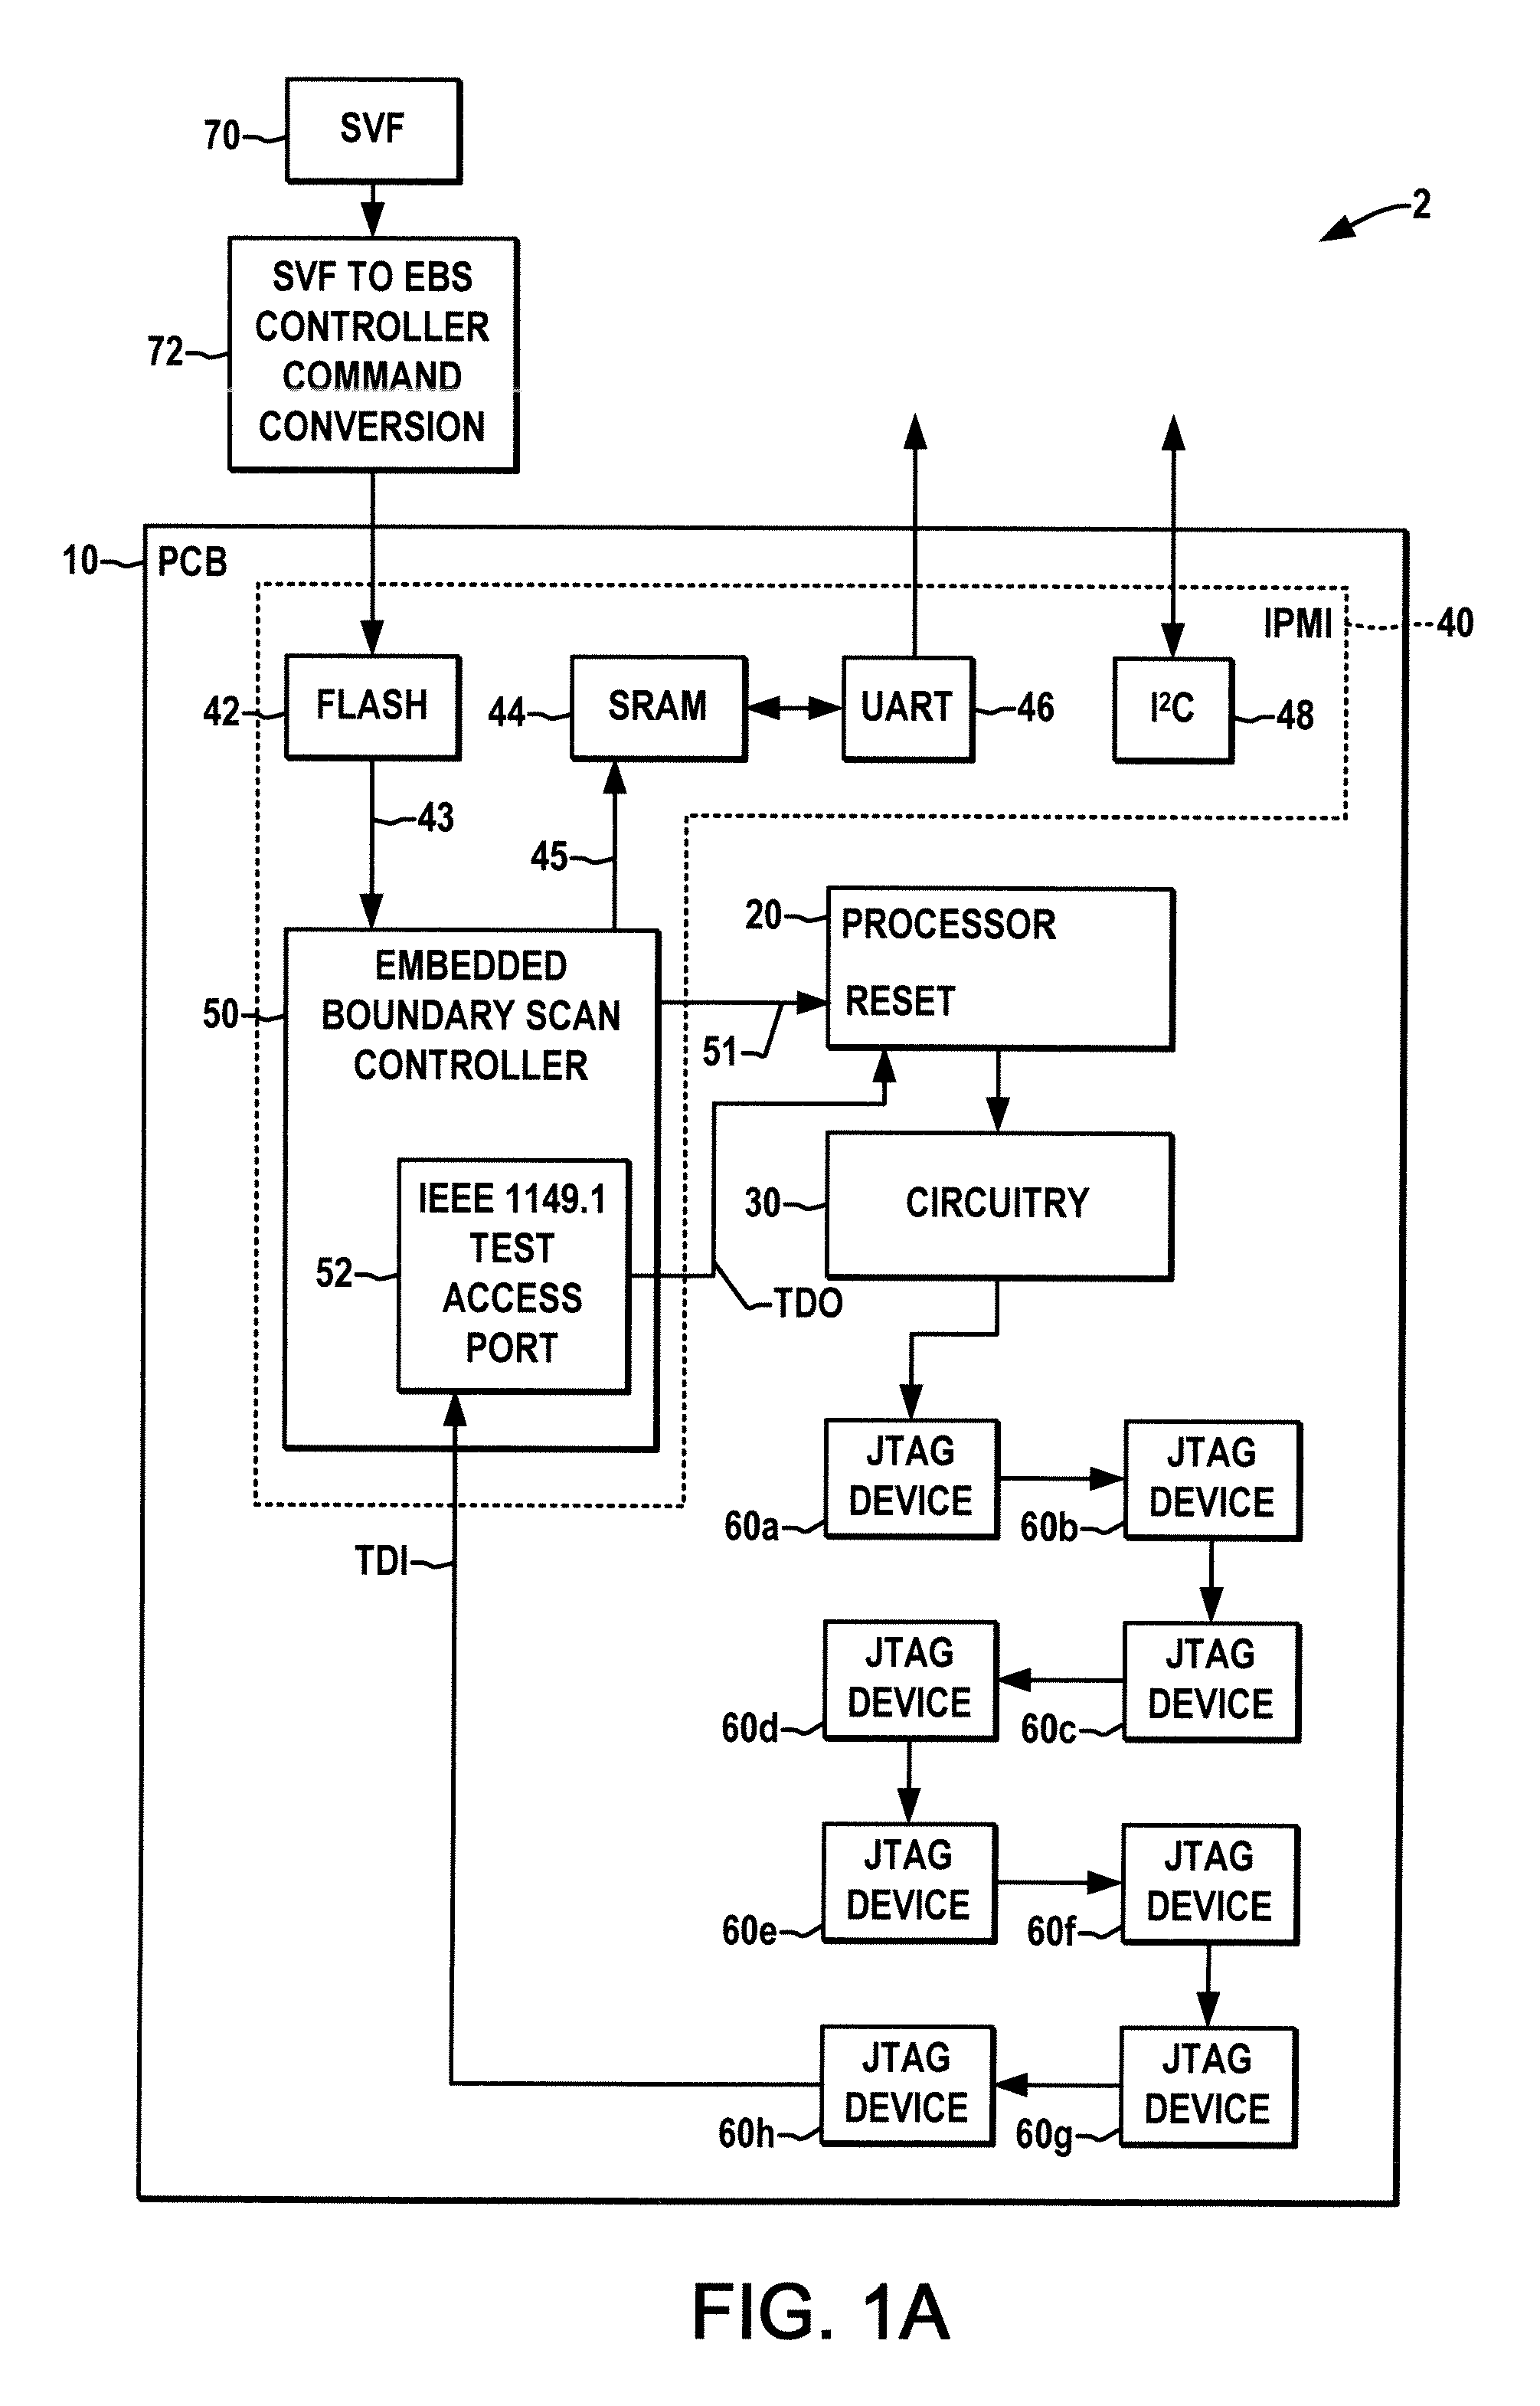 Apparatus and method for embedded boundary scan testing